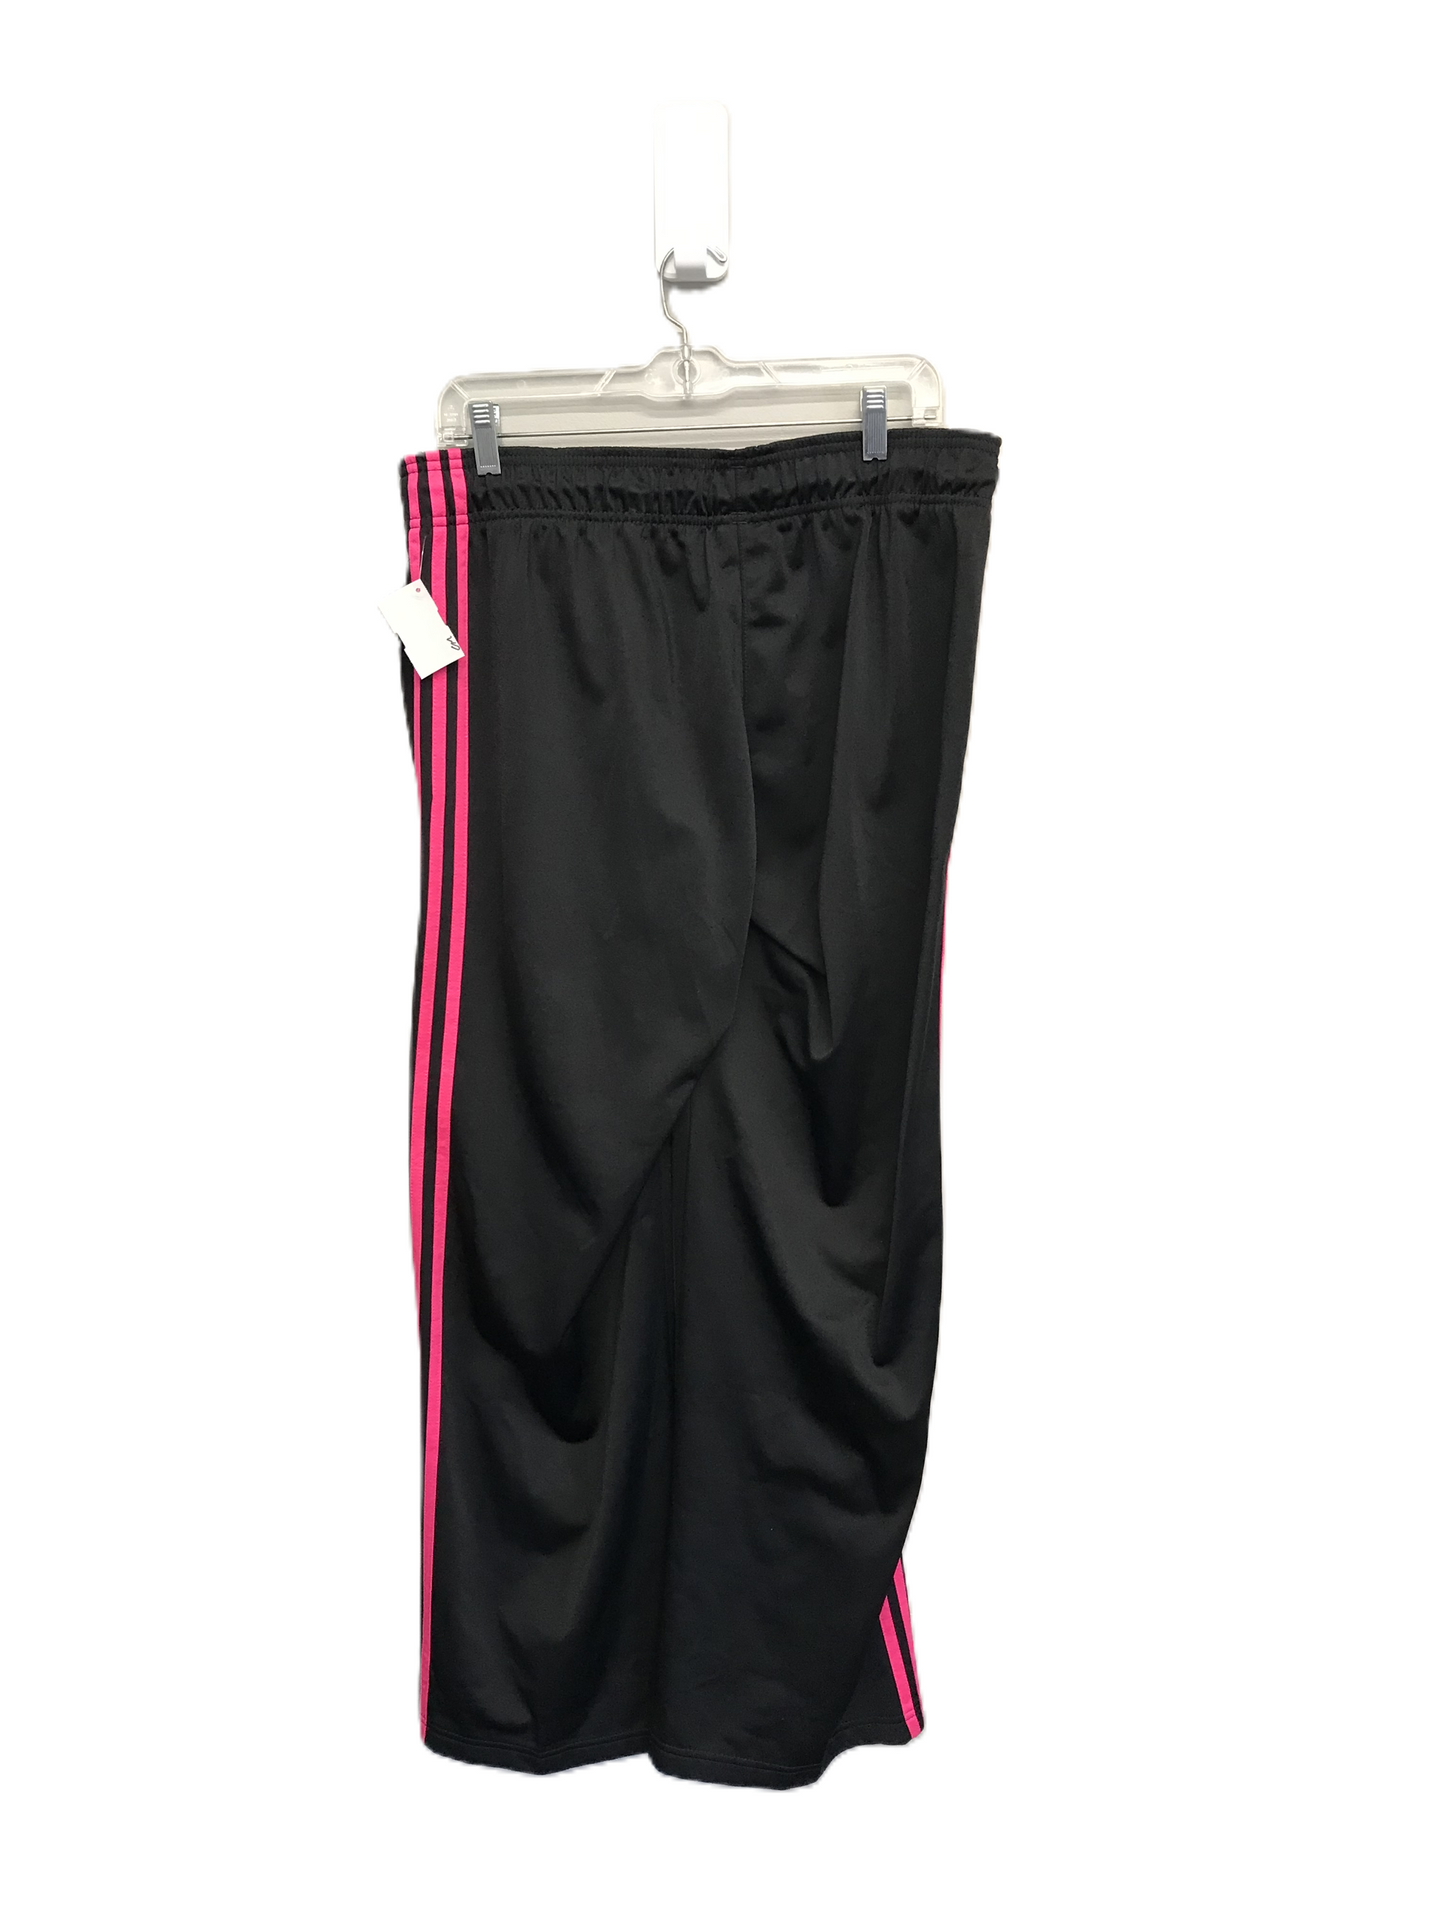 Black & Pink Athletic Pants By Adidas, Size: L